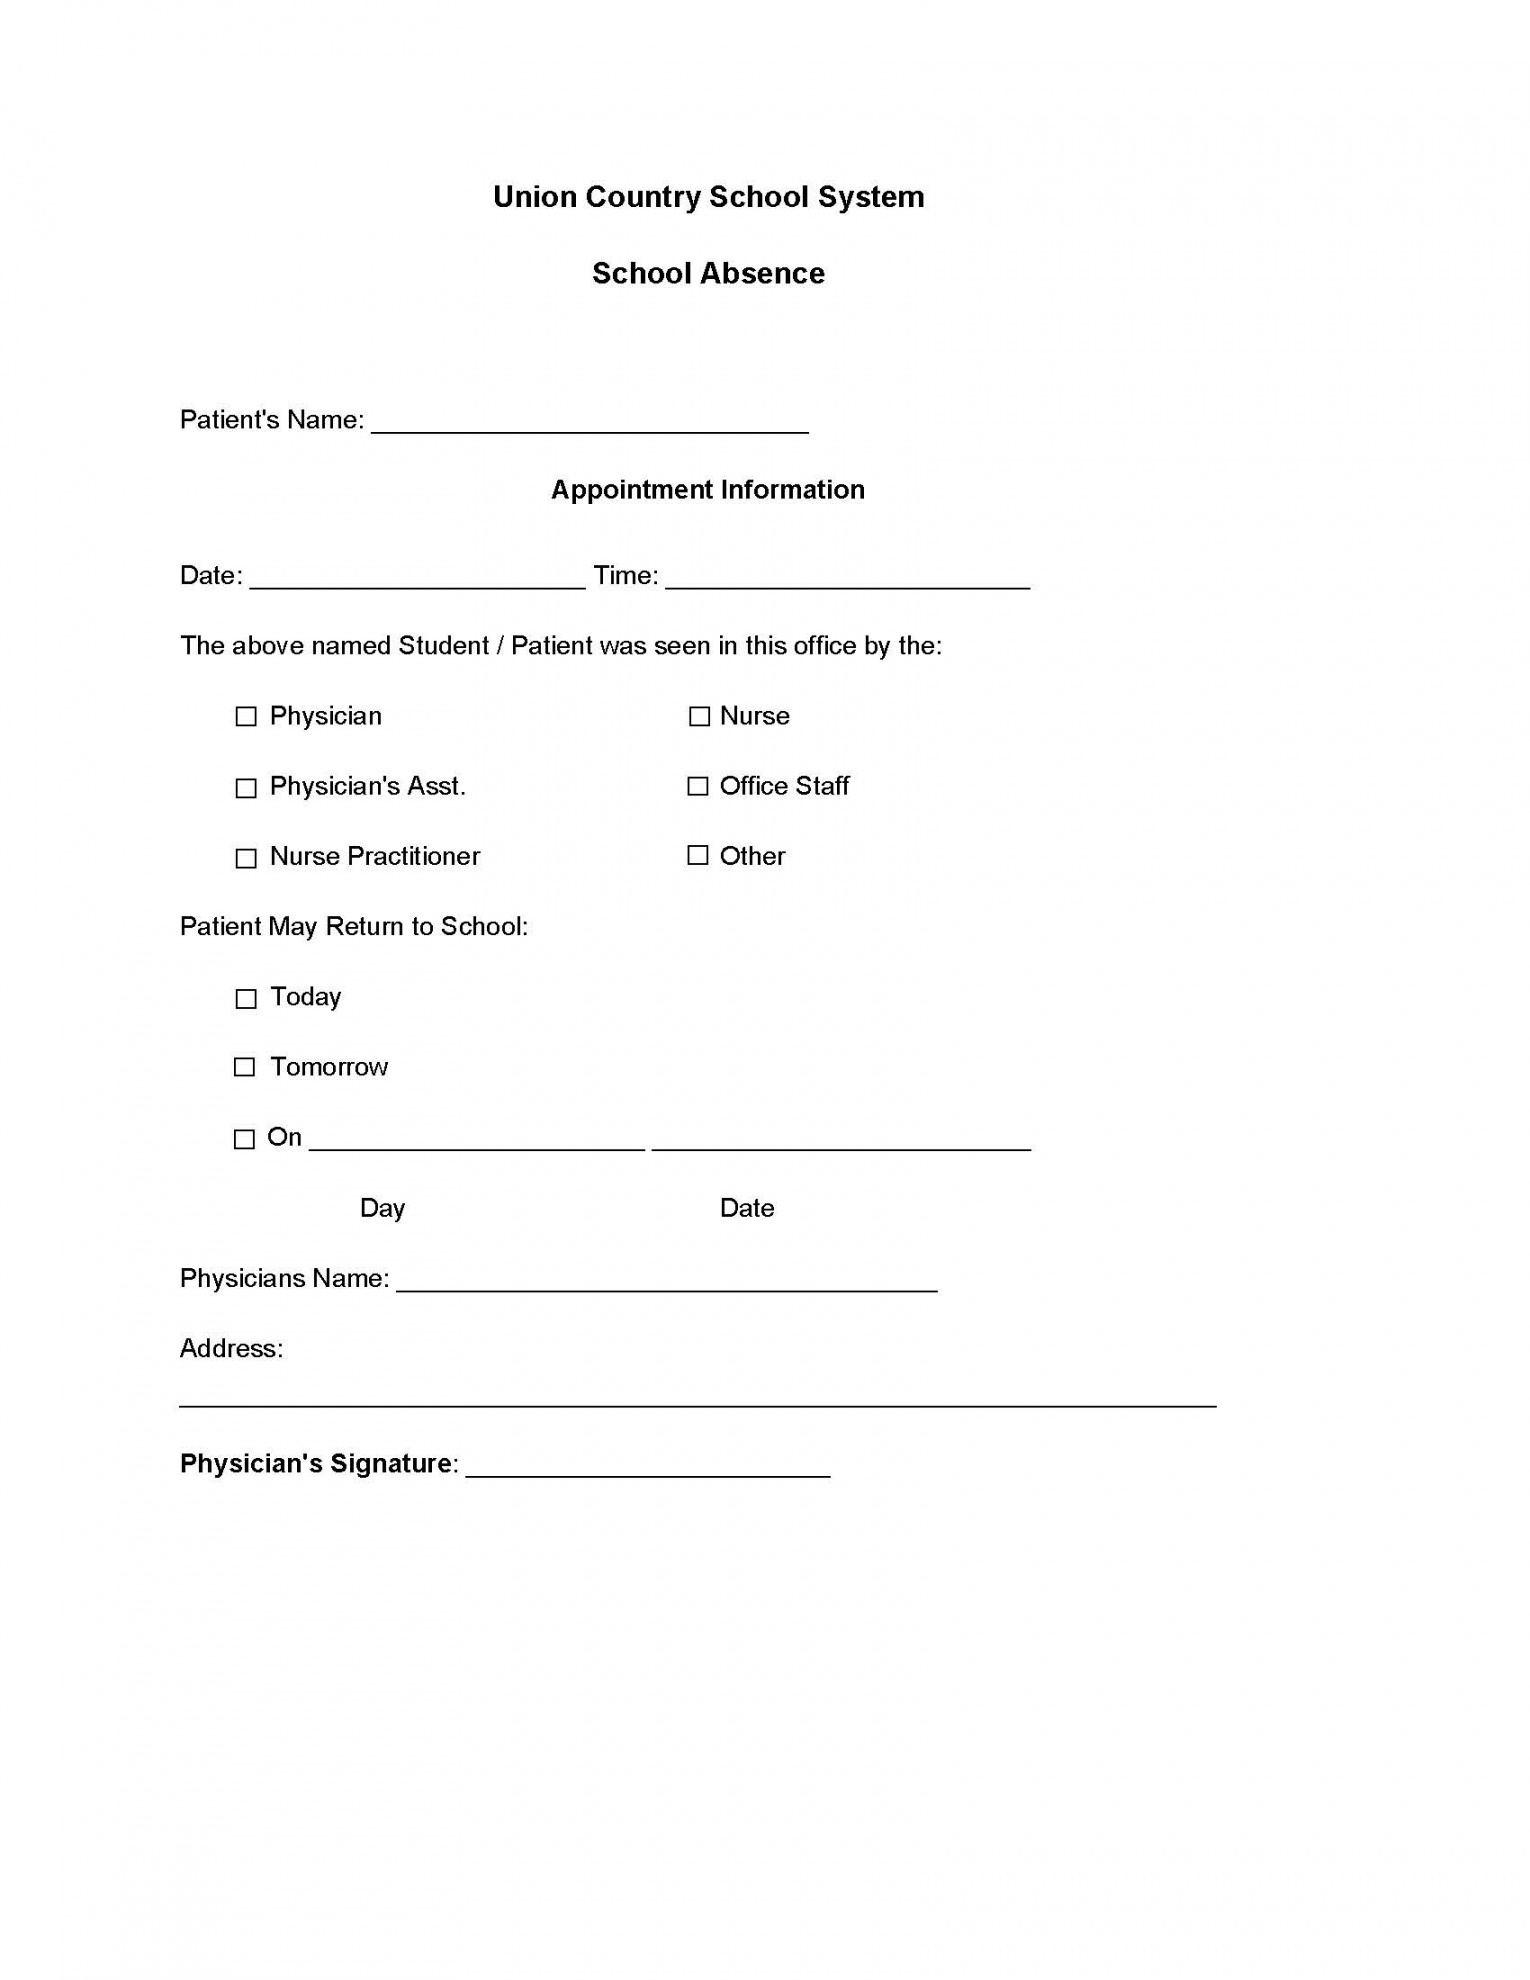 sample doctors note template for school absent  pdf format  e return to school doctors note template example